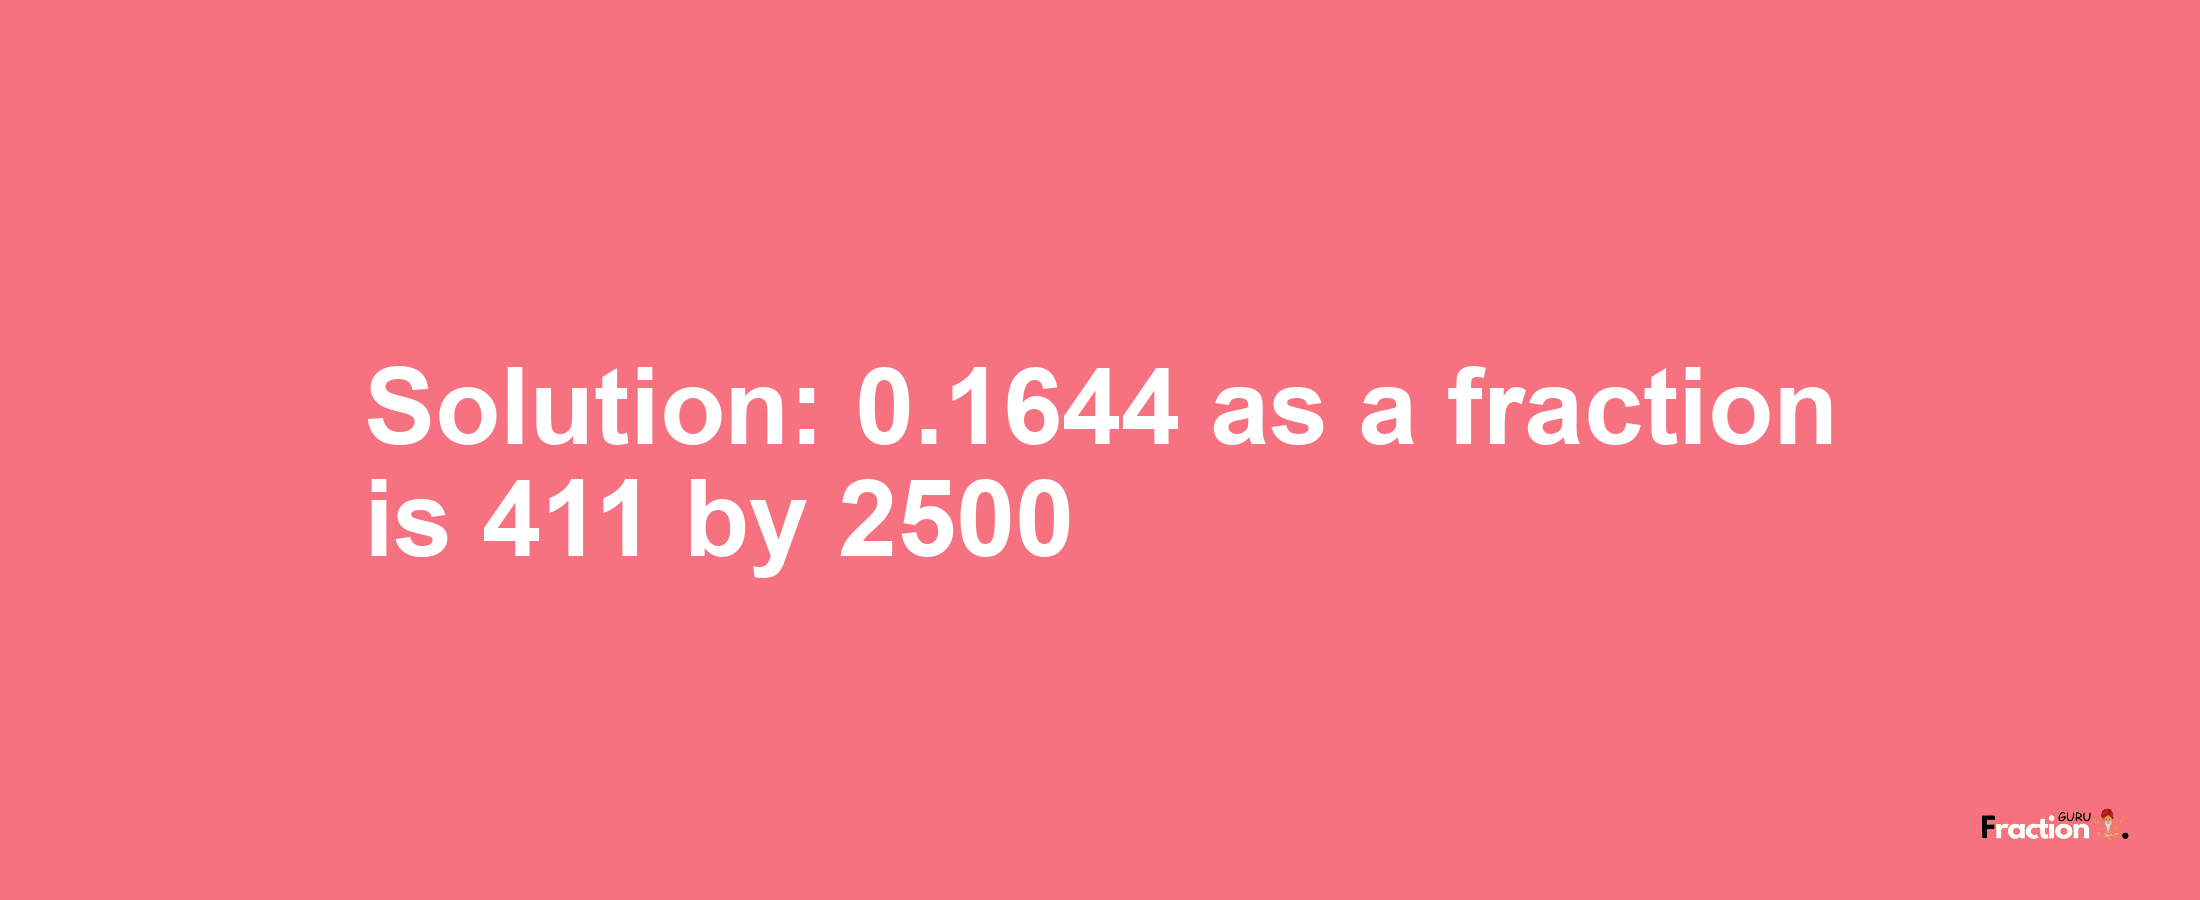 Solution:0.1644 as a fraction is 411/2500